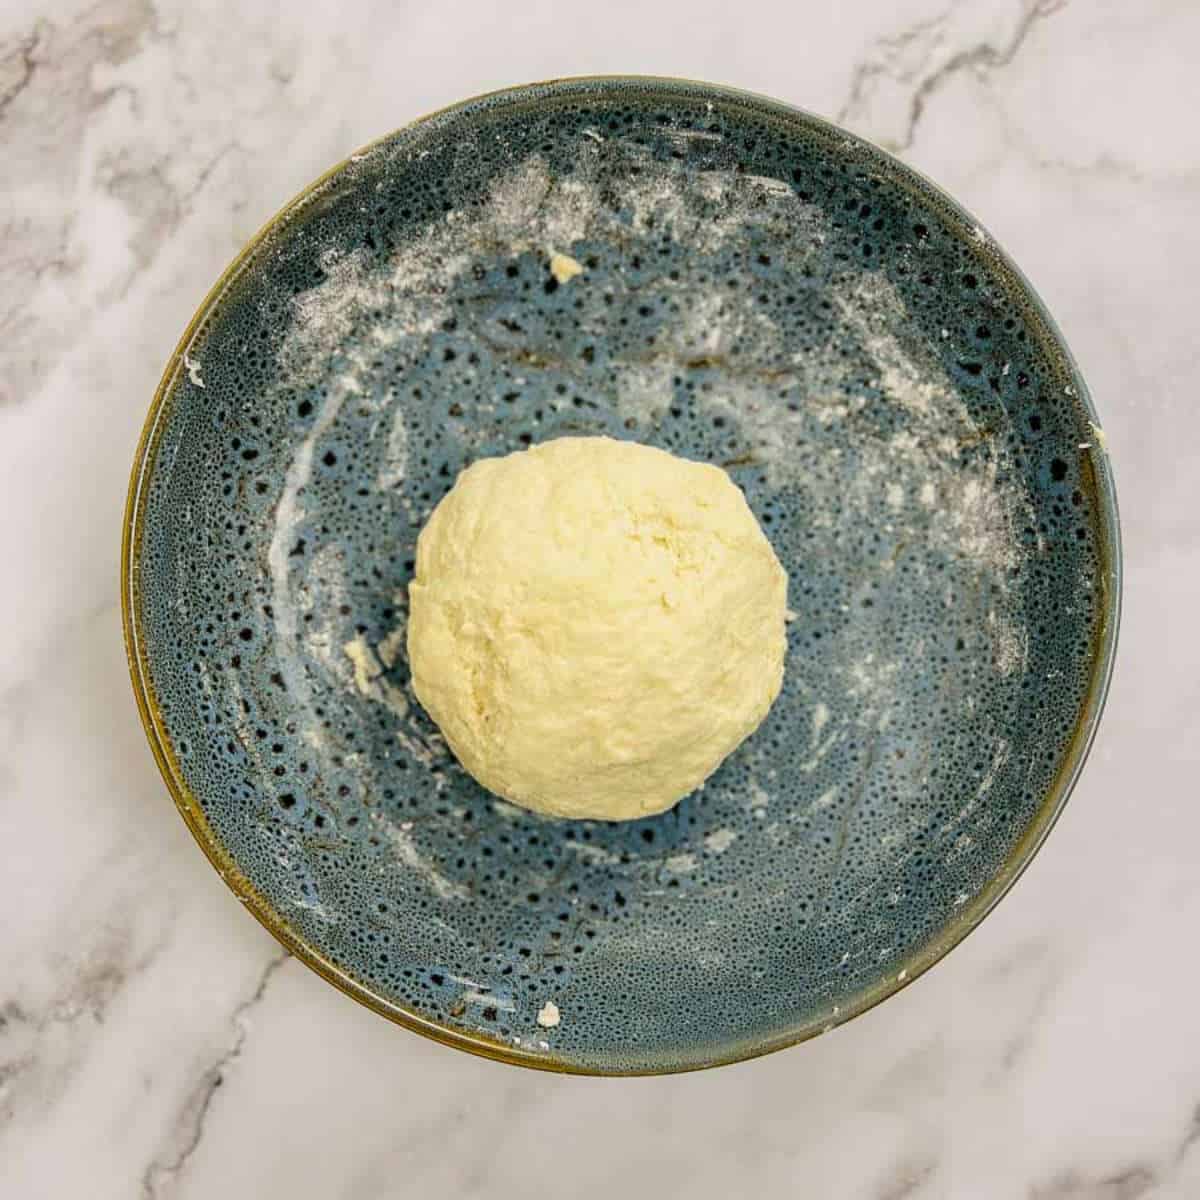 2-ingredient naan dough in a wide bowl.